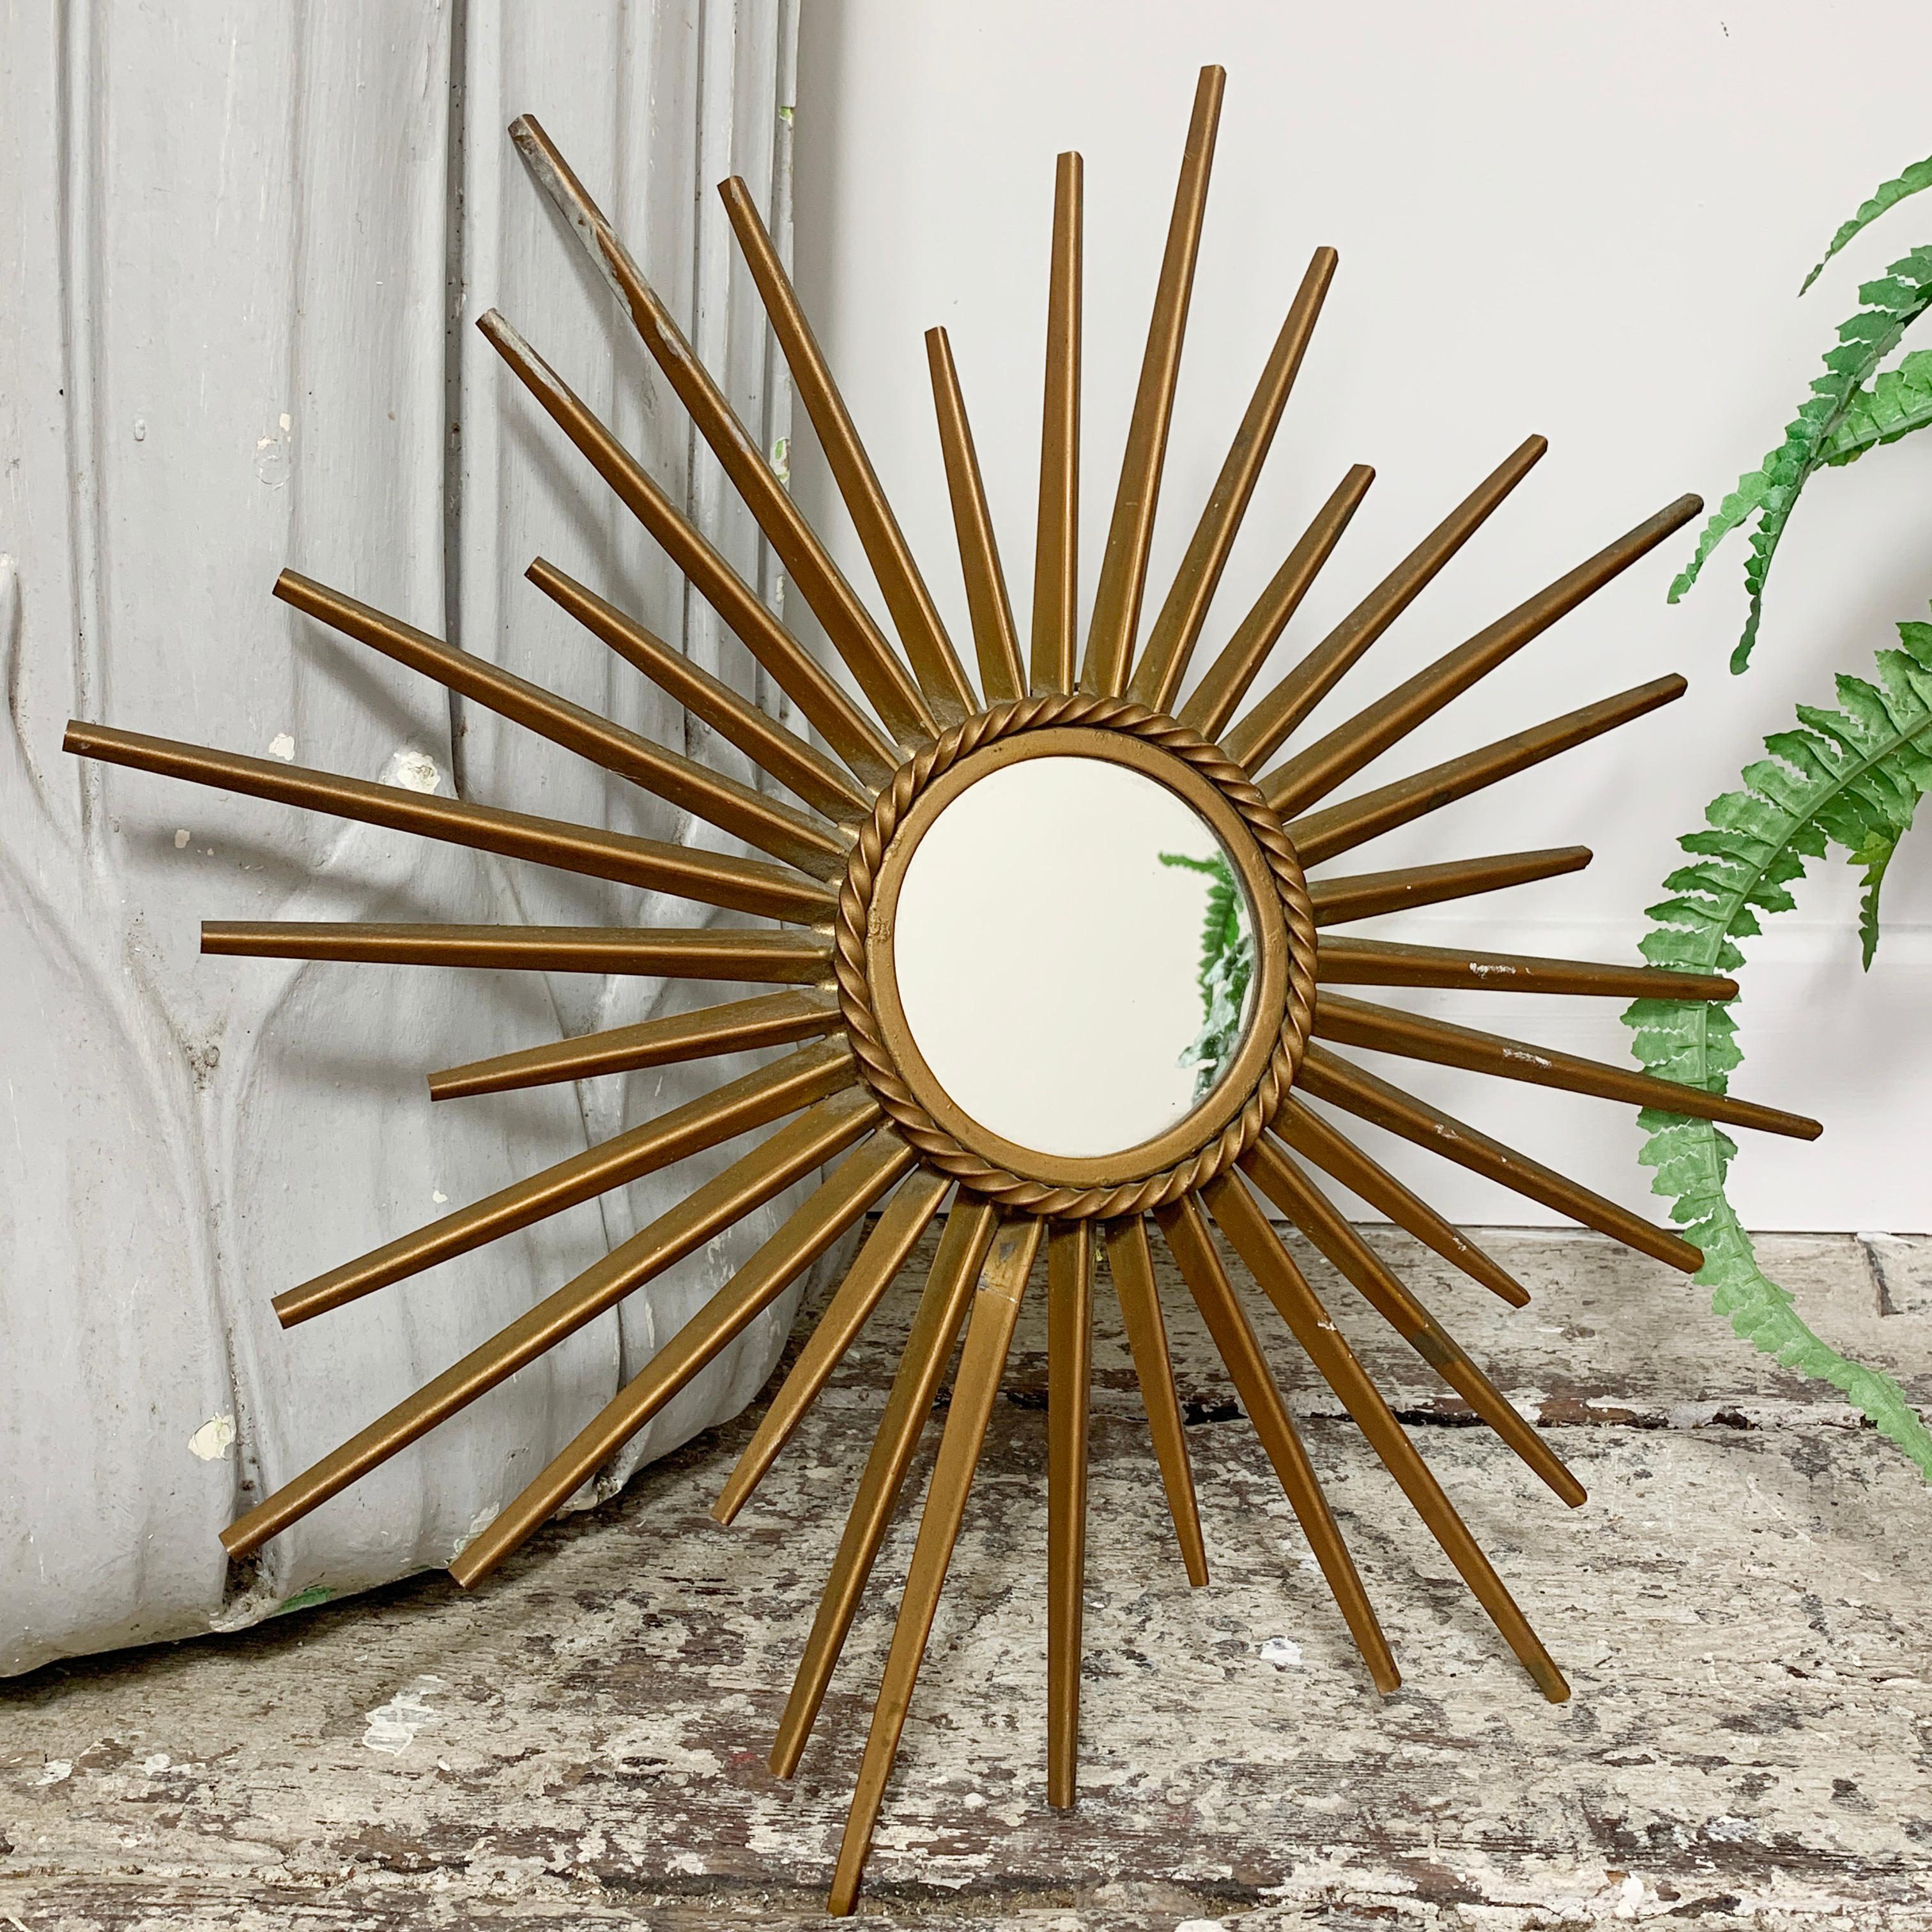 Petite Chaty Vallauris sunburst mirror,
France, 1950s
Stamped on the reverse 'Chaty Vallauris A.M’
Great condition for age
Rare smaller size
One of the rays has a kink to the metal
Measures: Width 40 cm, depth 2.5 cm, mirror 7.5 cm.

 